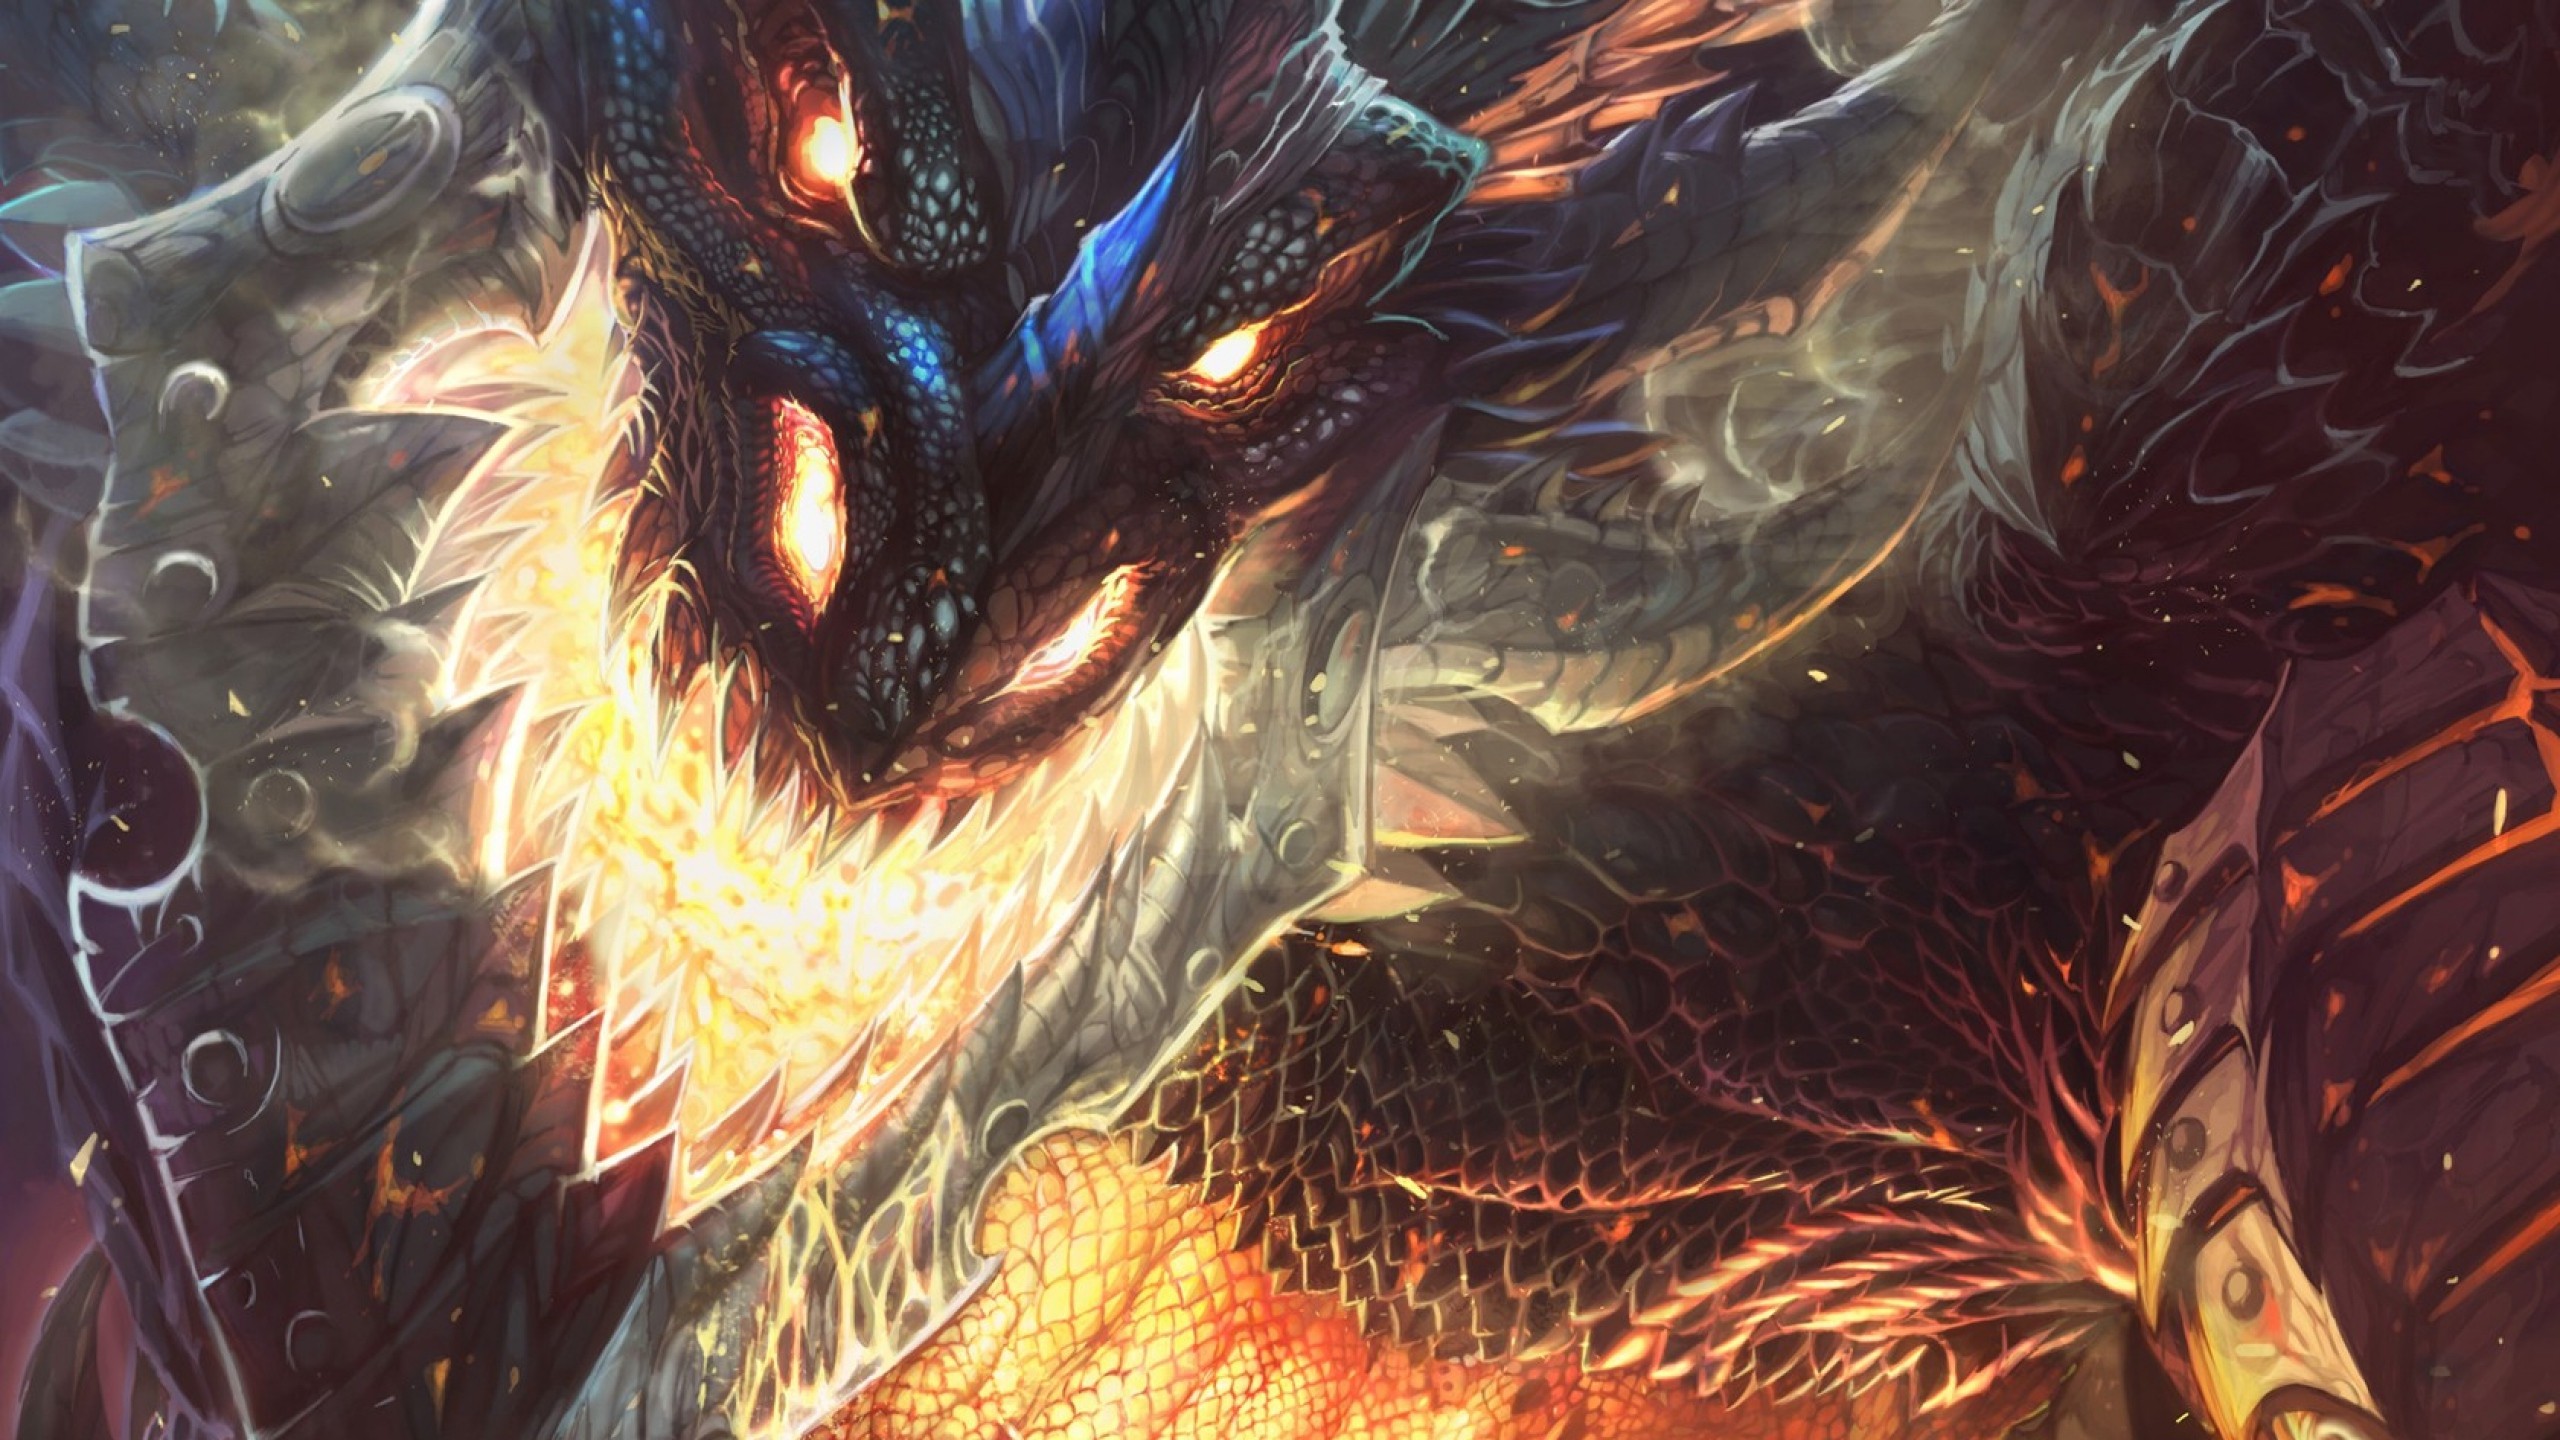 General 2560x1440 Deathwing dragon World of Warcraft: Cataclysm PC gaming video game art video games Blizzard Entertainment fantasy art creature